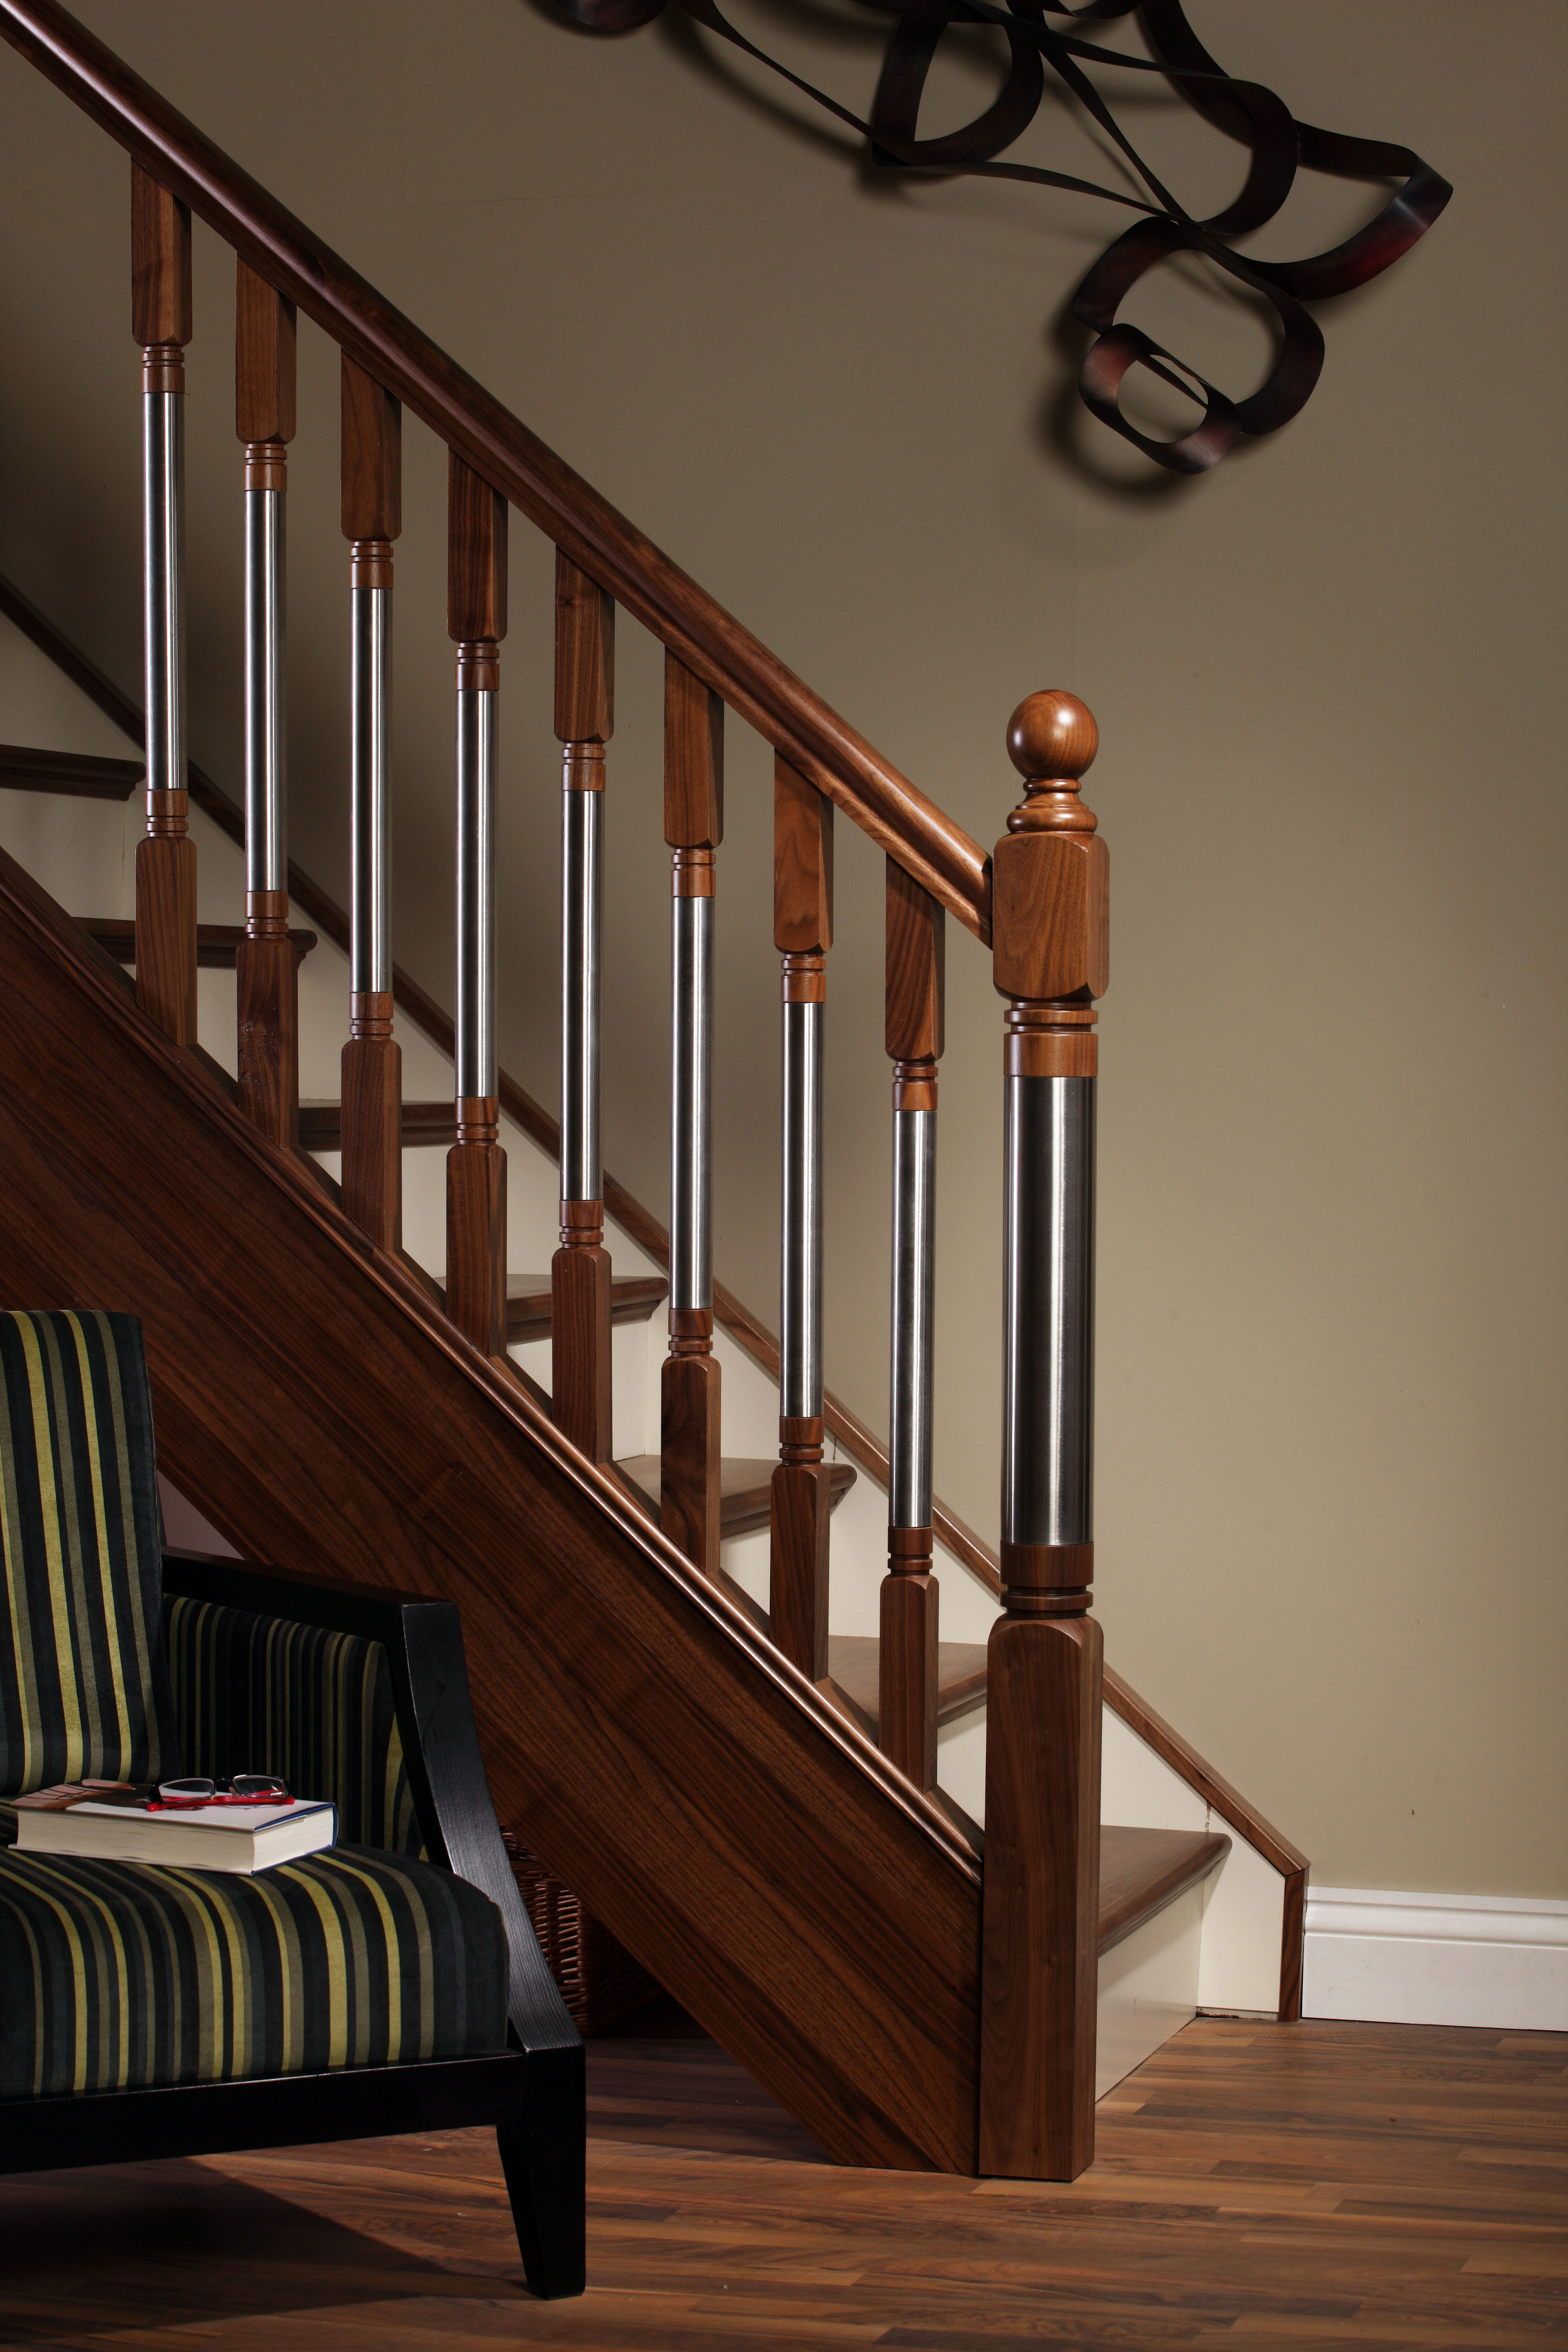 2. Practical Tips for Proper Usage and Maintenance of Stair Railings